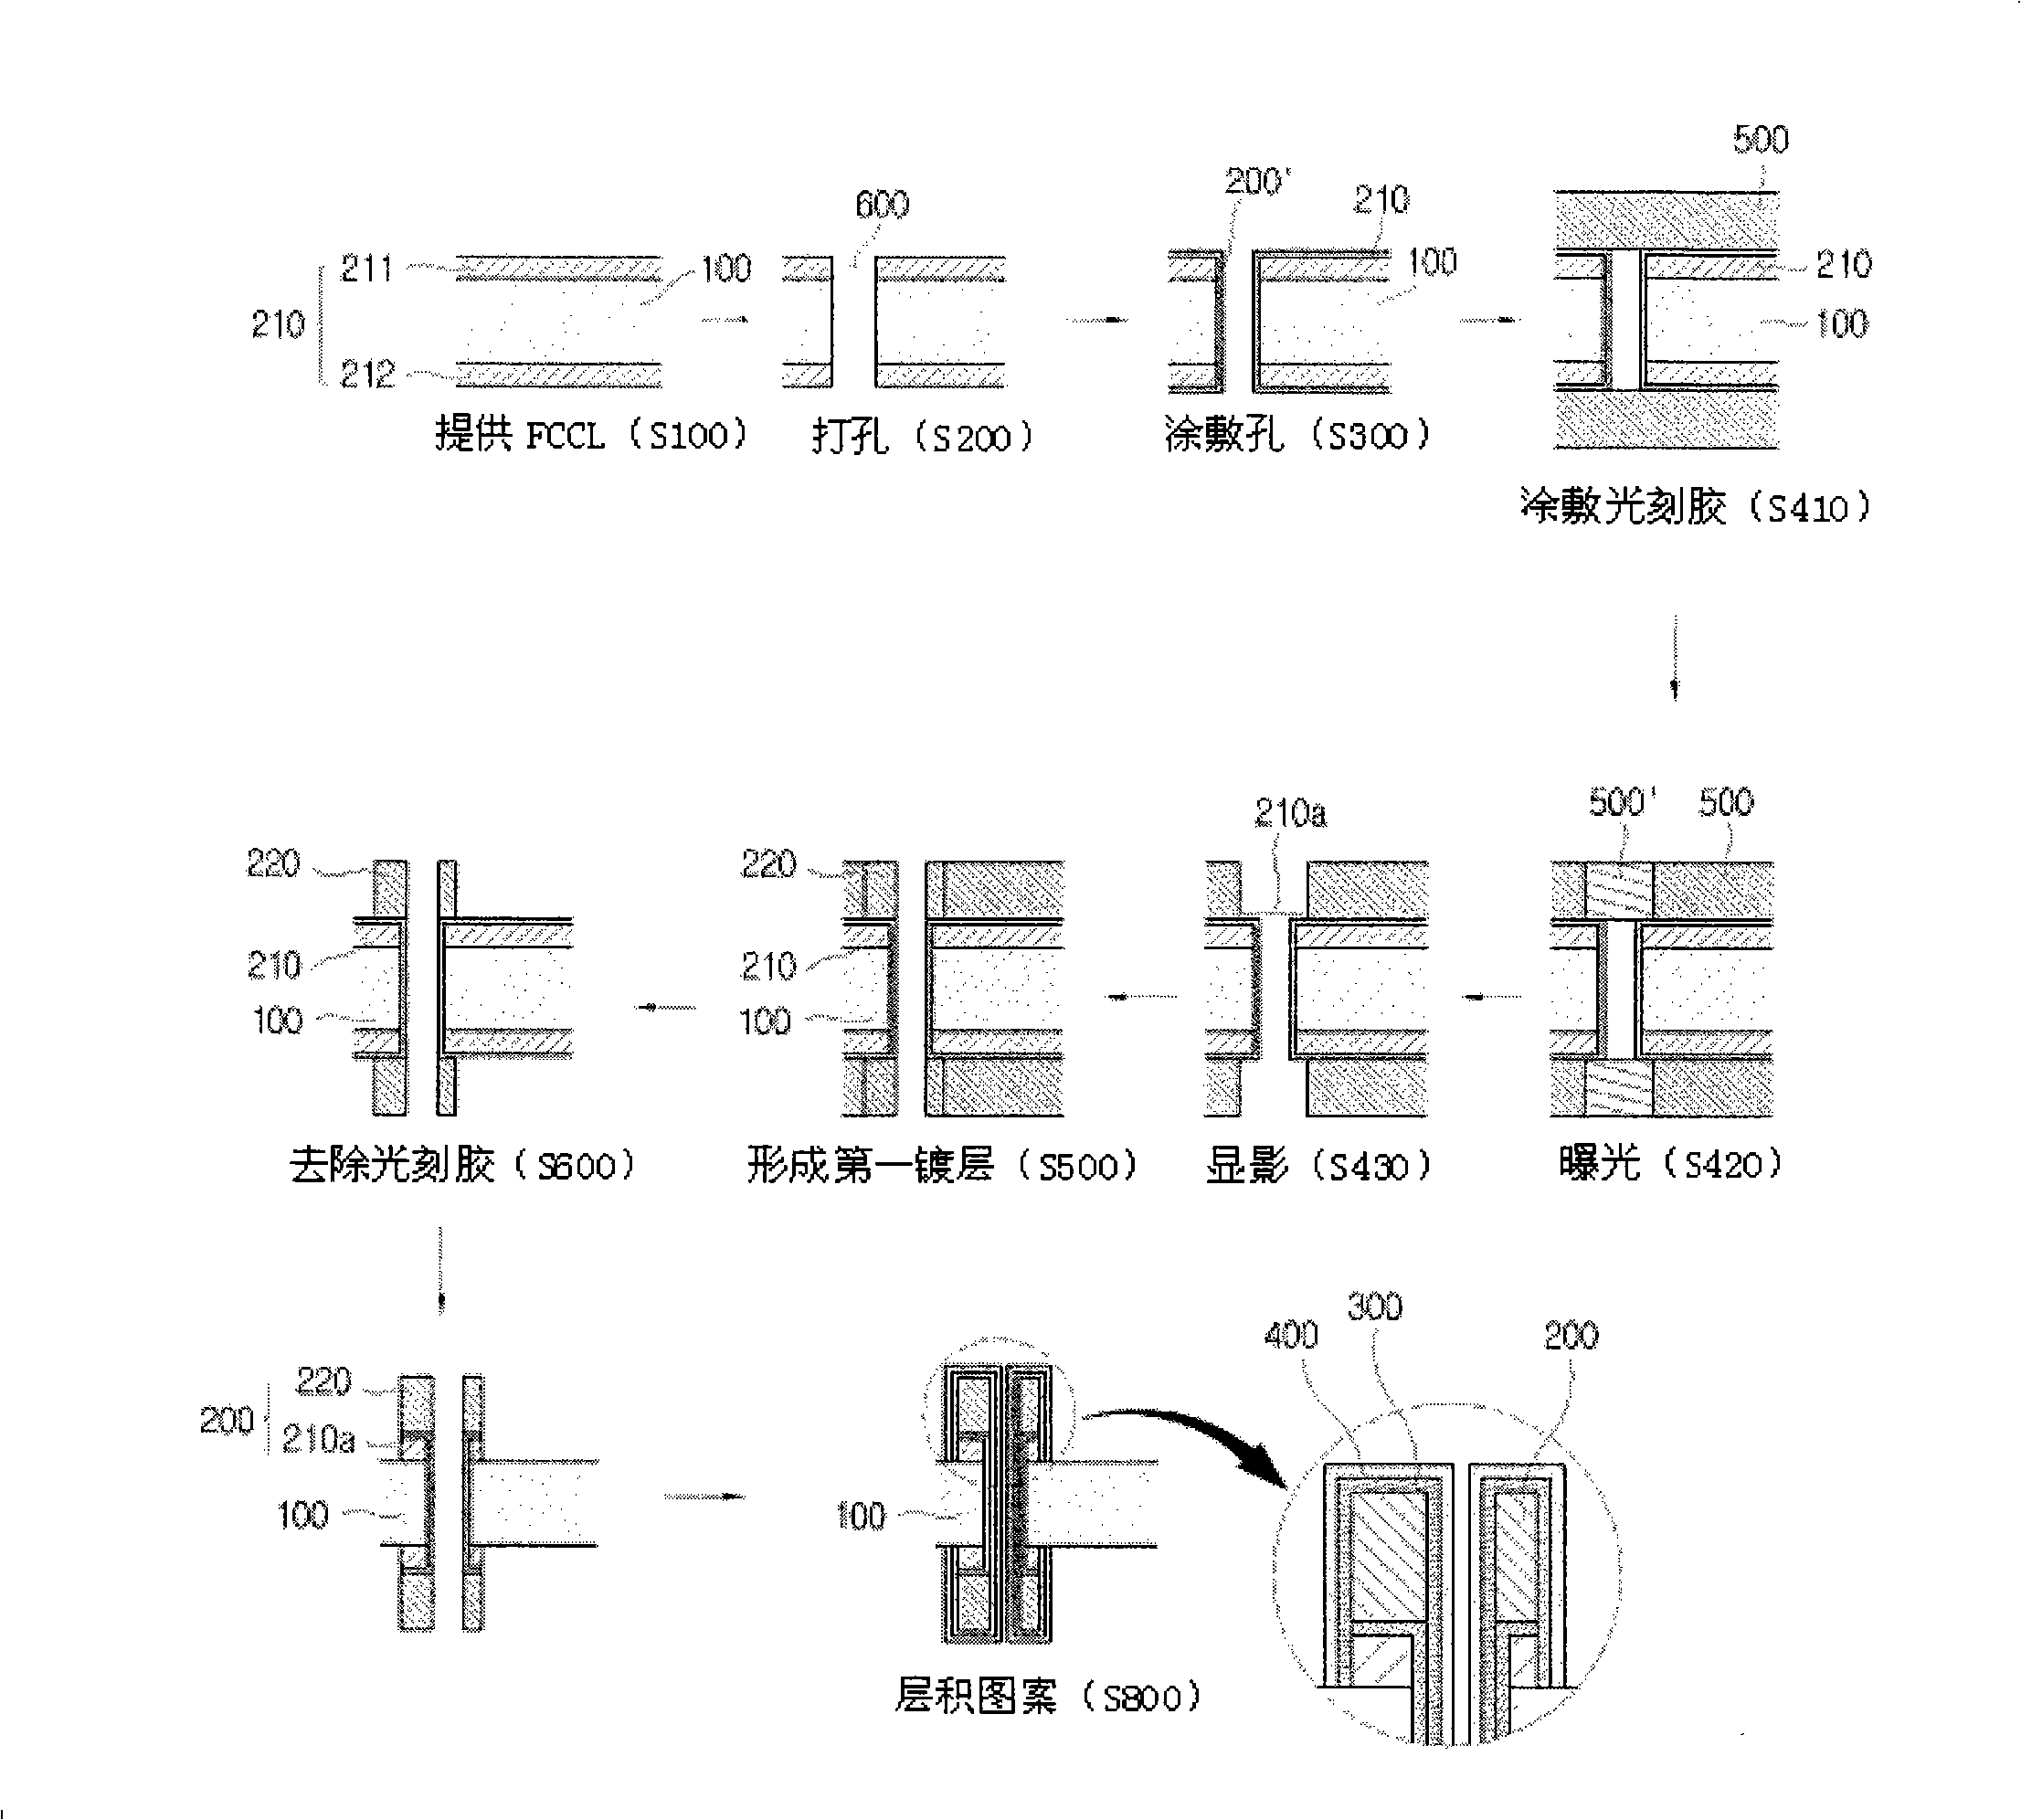 Method for manufacturing flexible printed circuit board and metallic wiring pattern of flexible printed circuit board using thereof